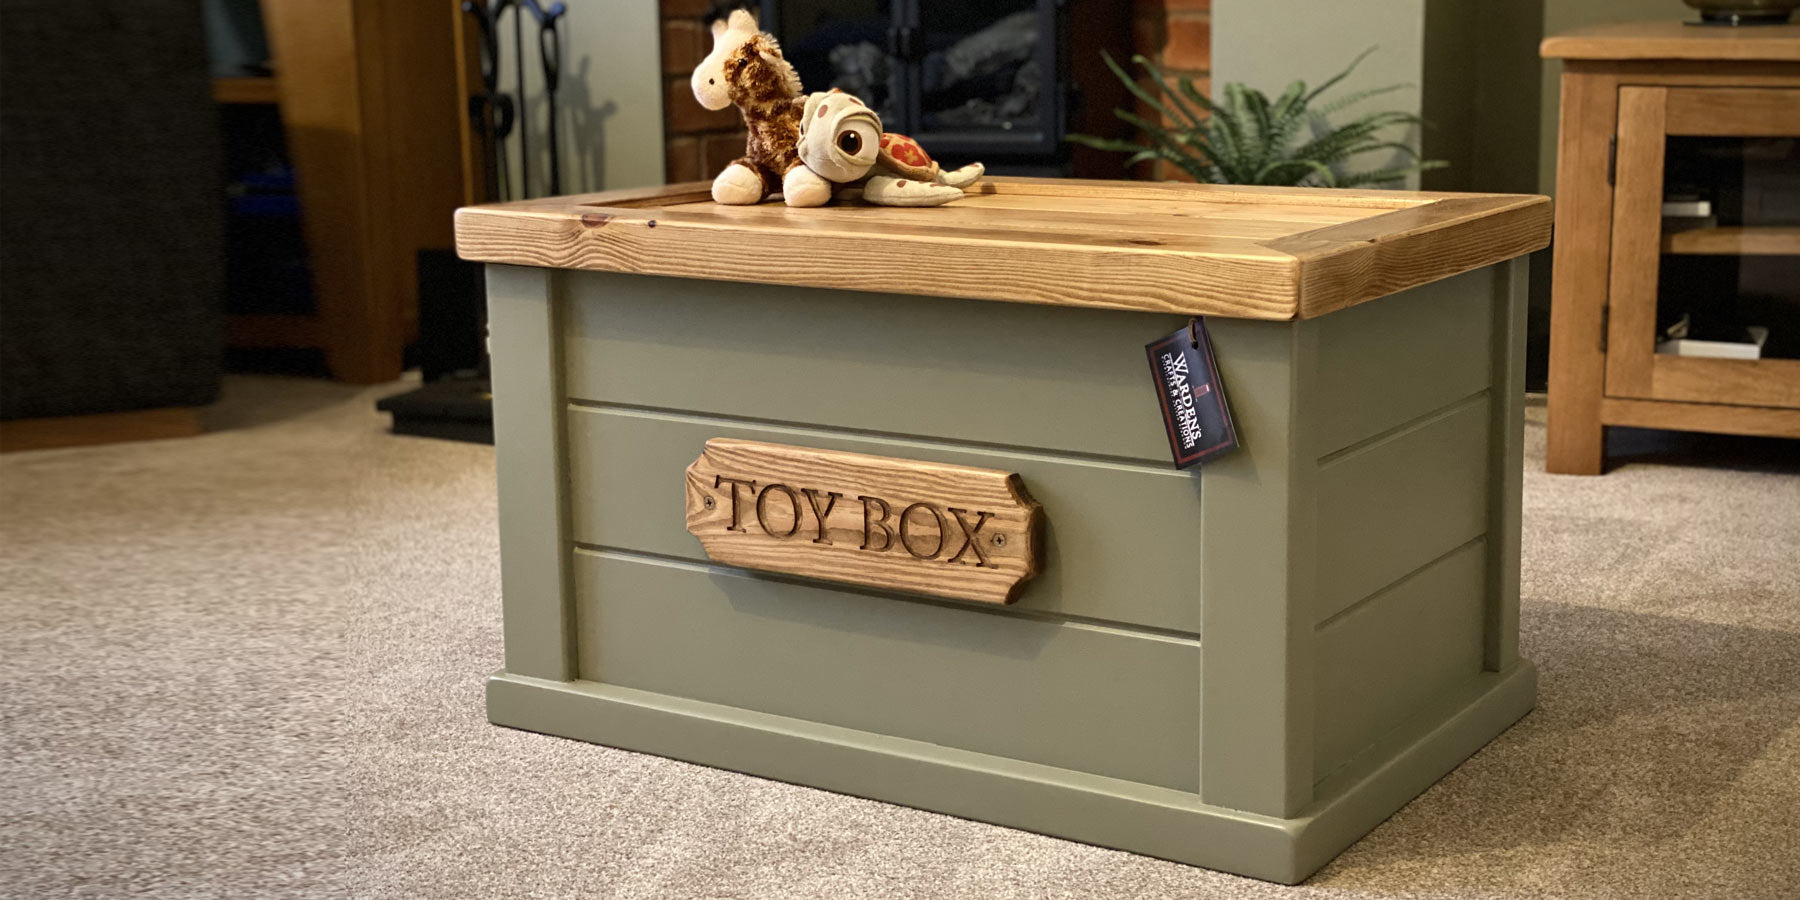 Treron Paint Toy Box - Slideshow - Christmas Gift promotion - Warden's Crafts & Creations